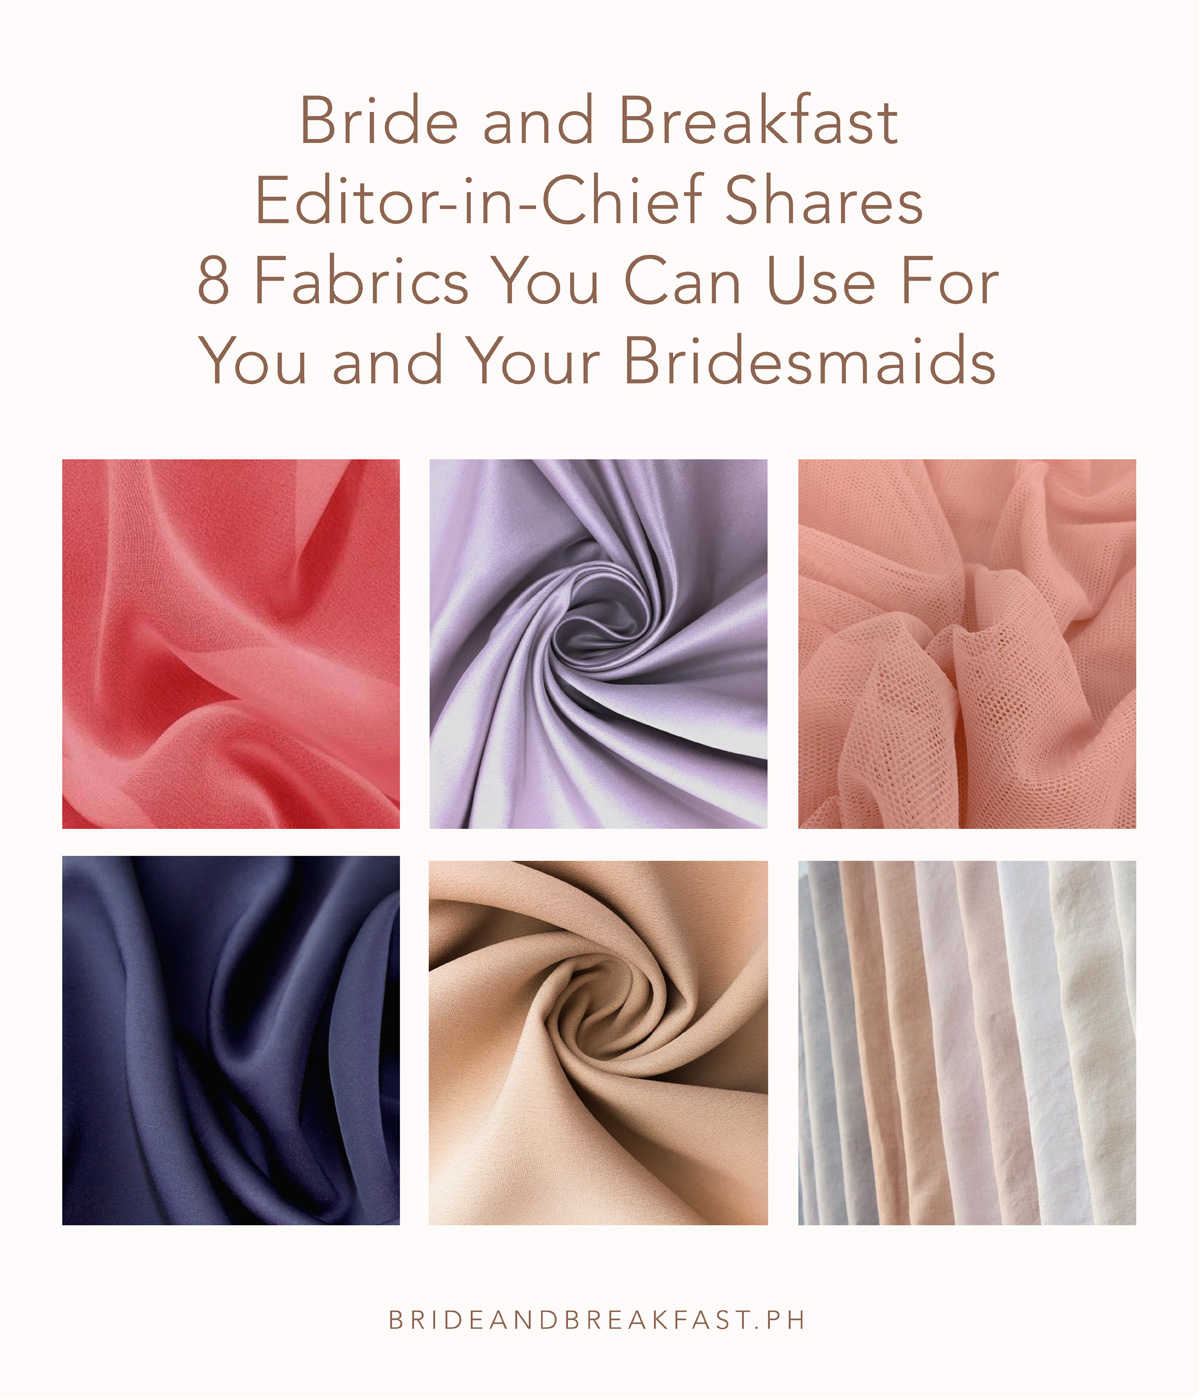 Bride and Breakfast Editor-in-Chief Shares 8 Fabrics You Can Use For You and Your Bridesmaids